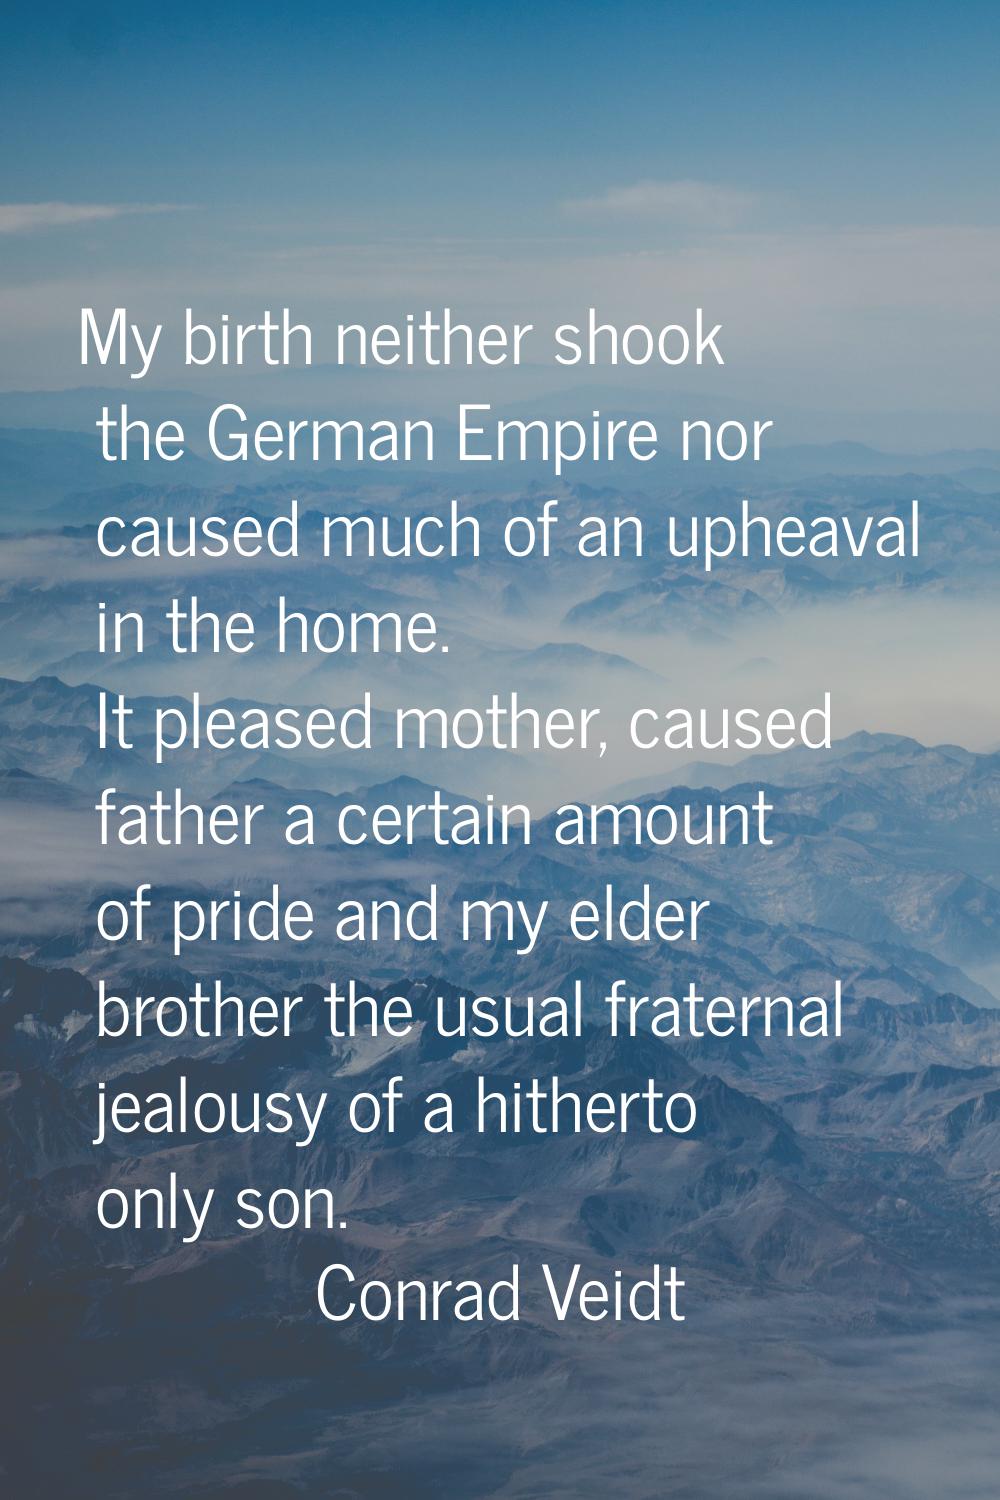 My birth neither shook the German Empire nor caused much of an upheaval in the home. It pleased mot